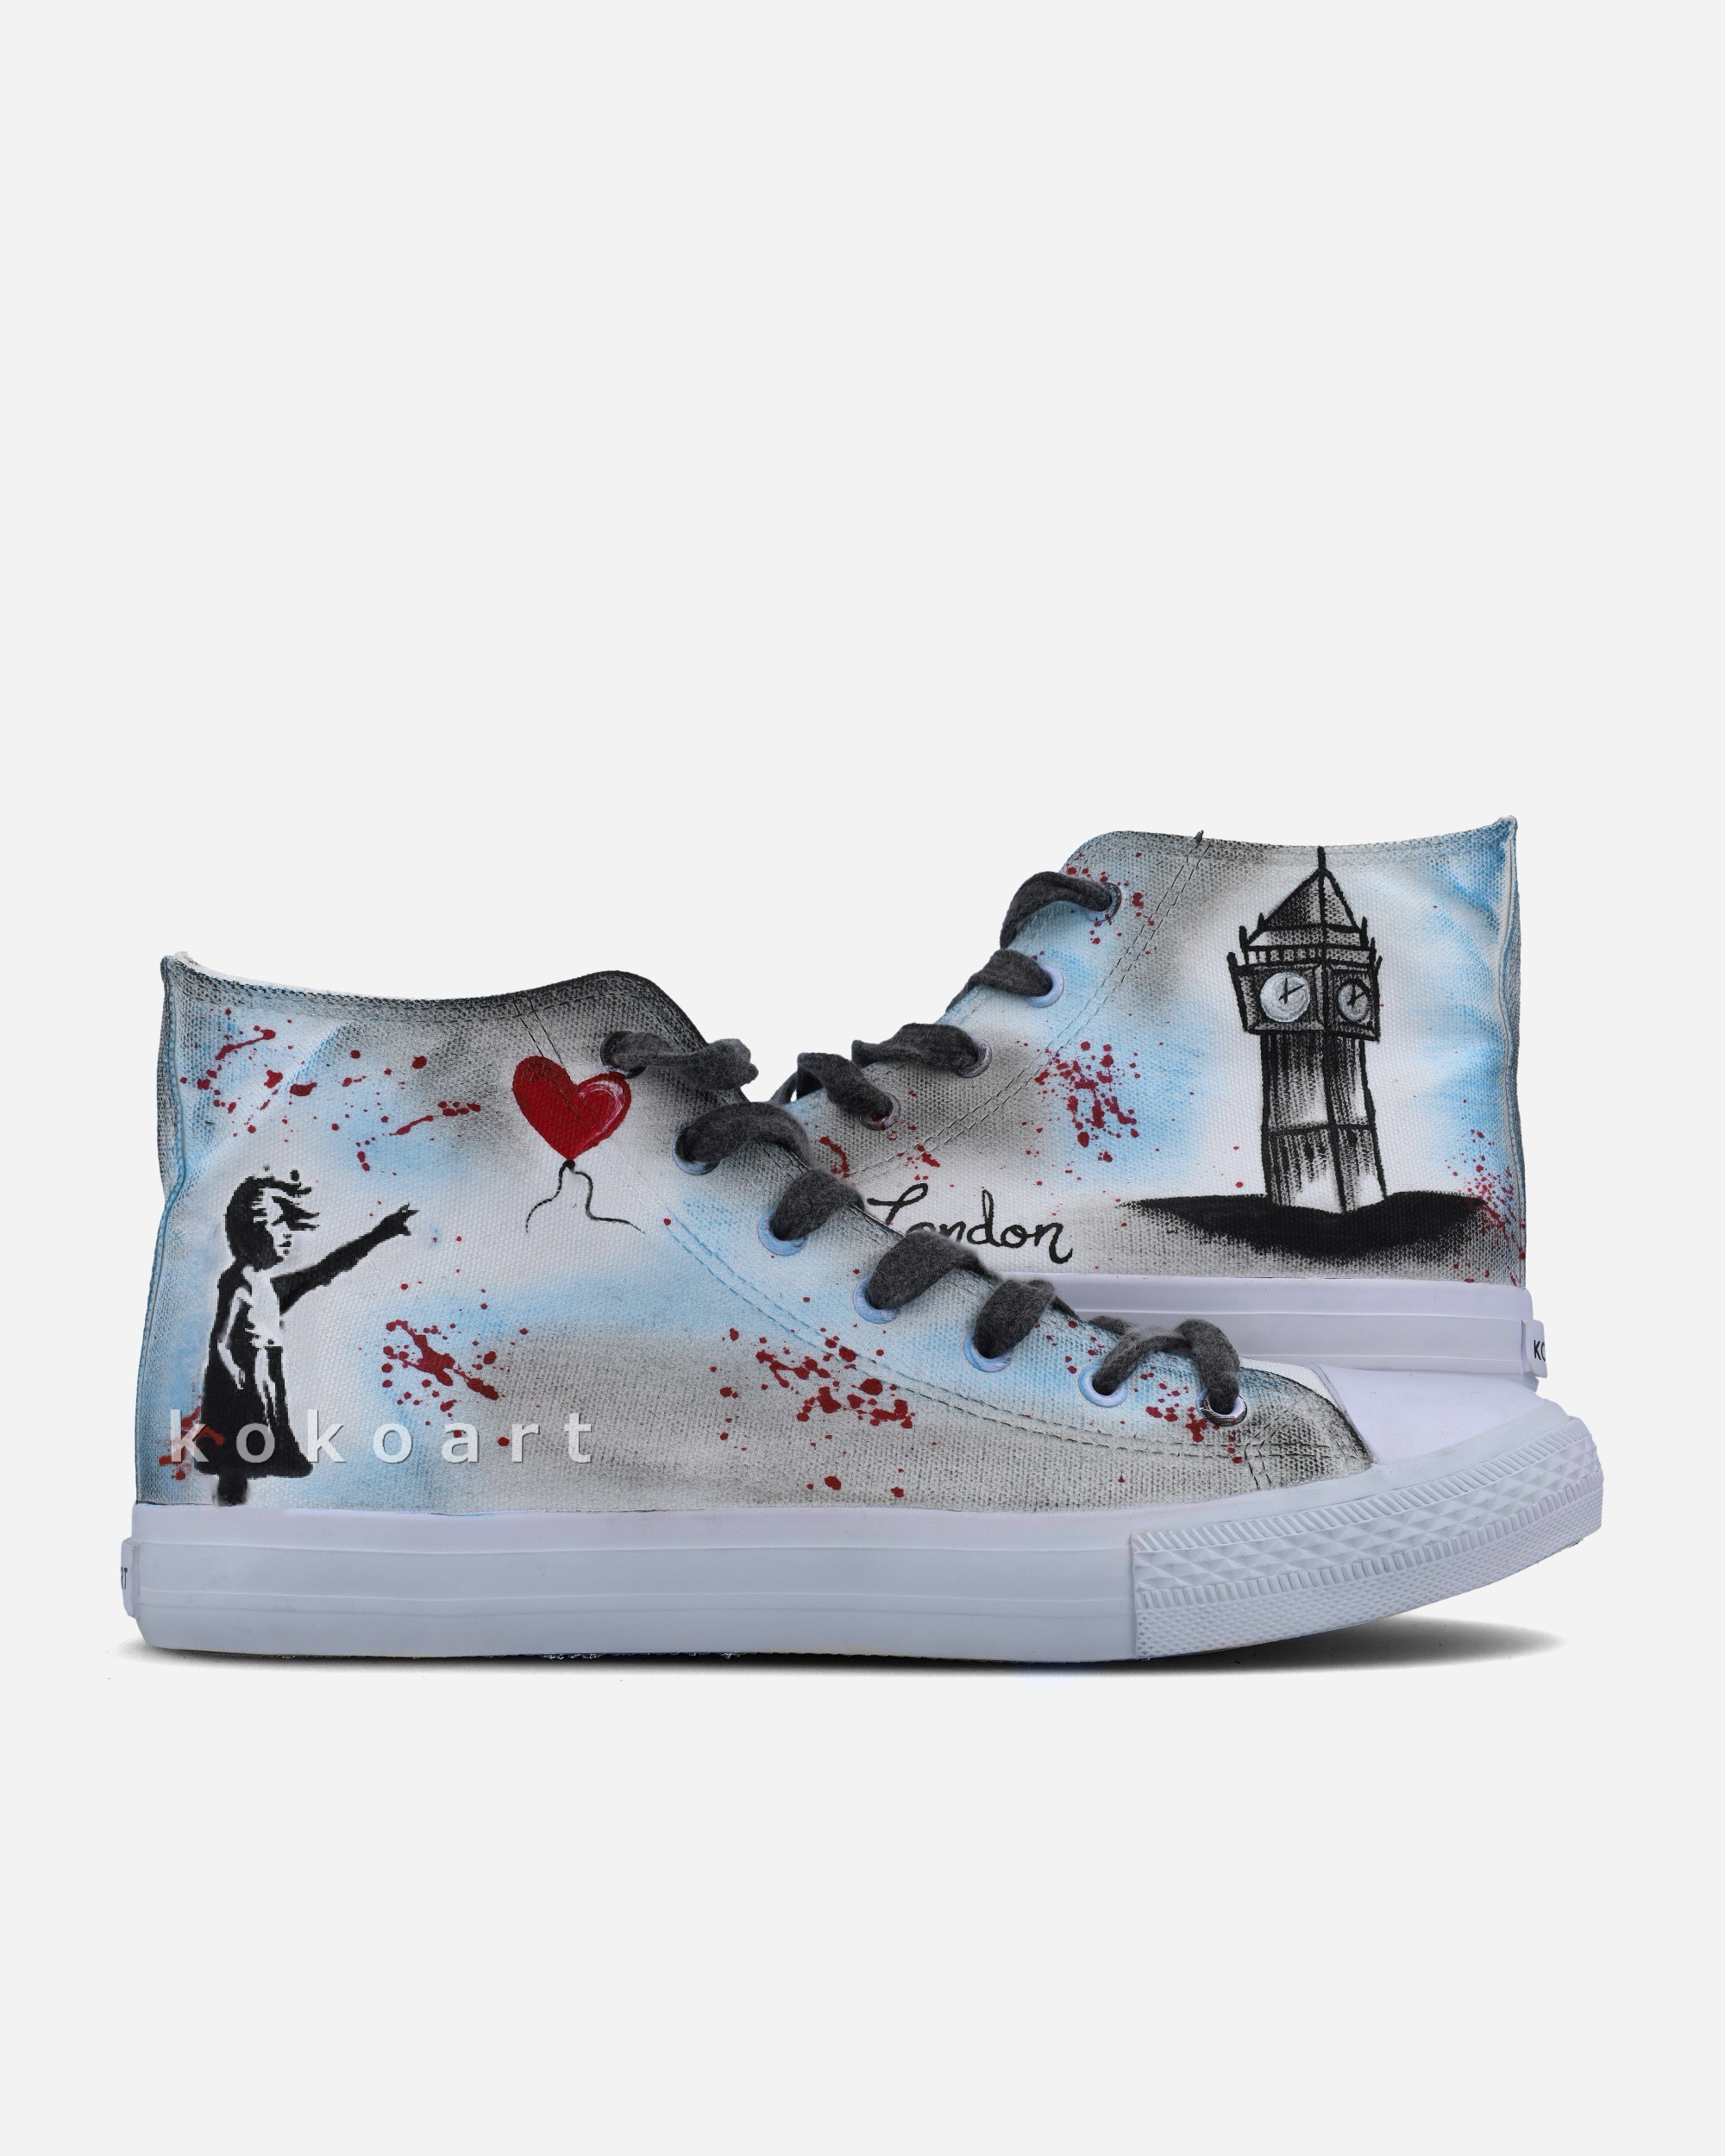 Big Ben Banksy Hand Painted Shoes